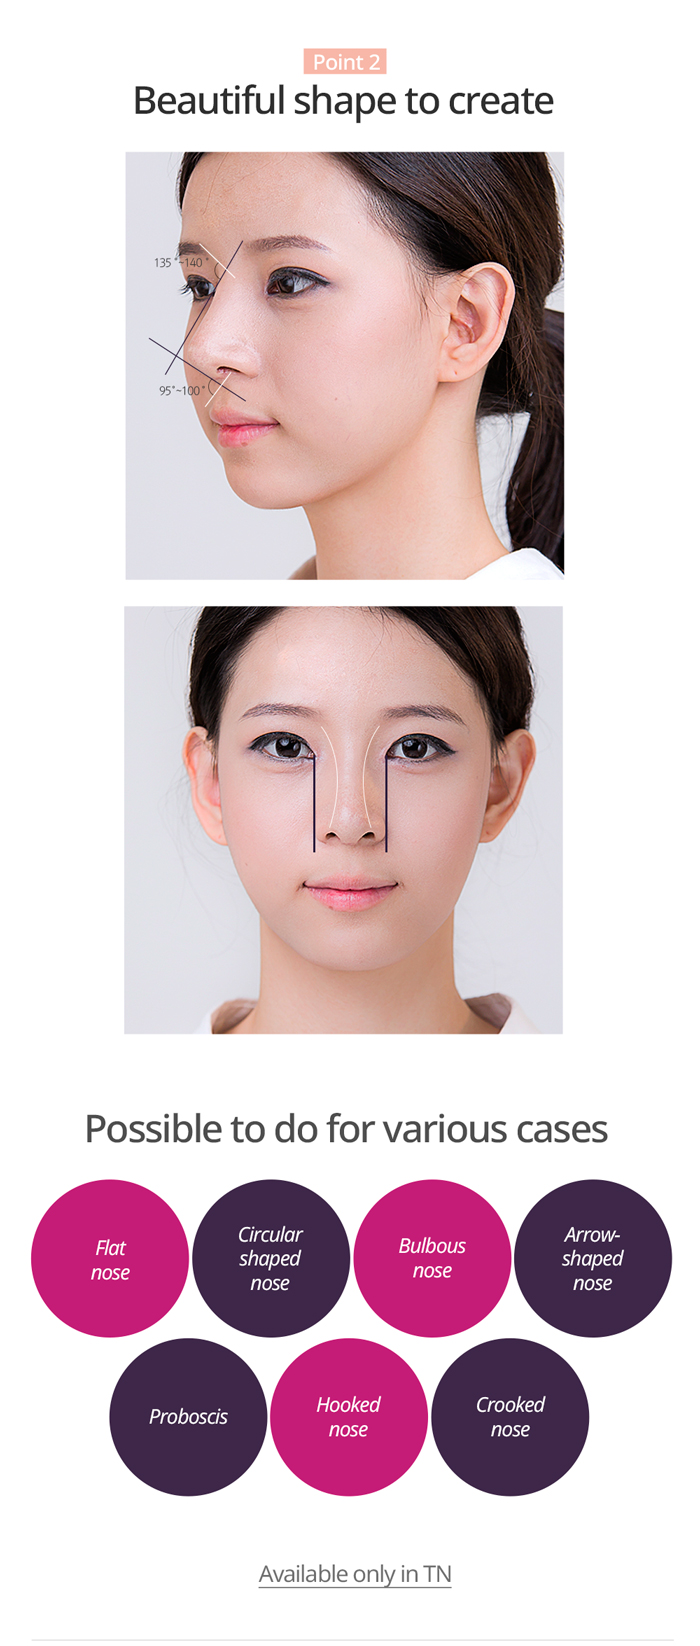 TN x AllaboutMEI special offer / beautiful and natural shape to create by no scar rhinoplasty